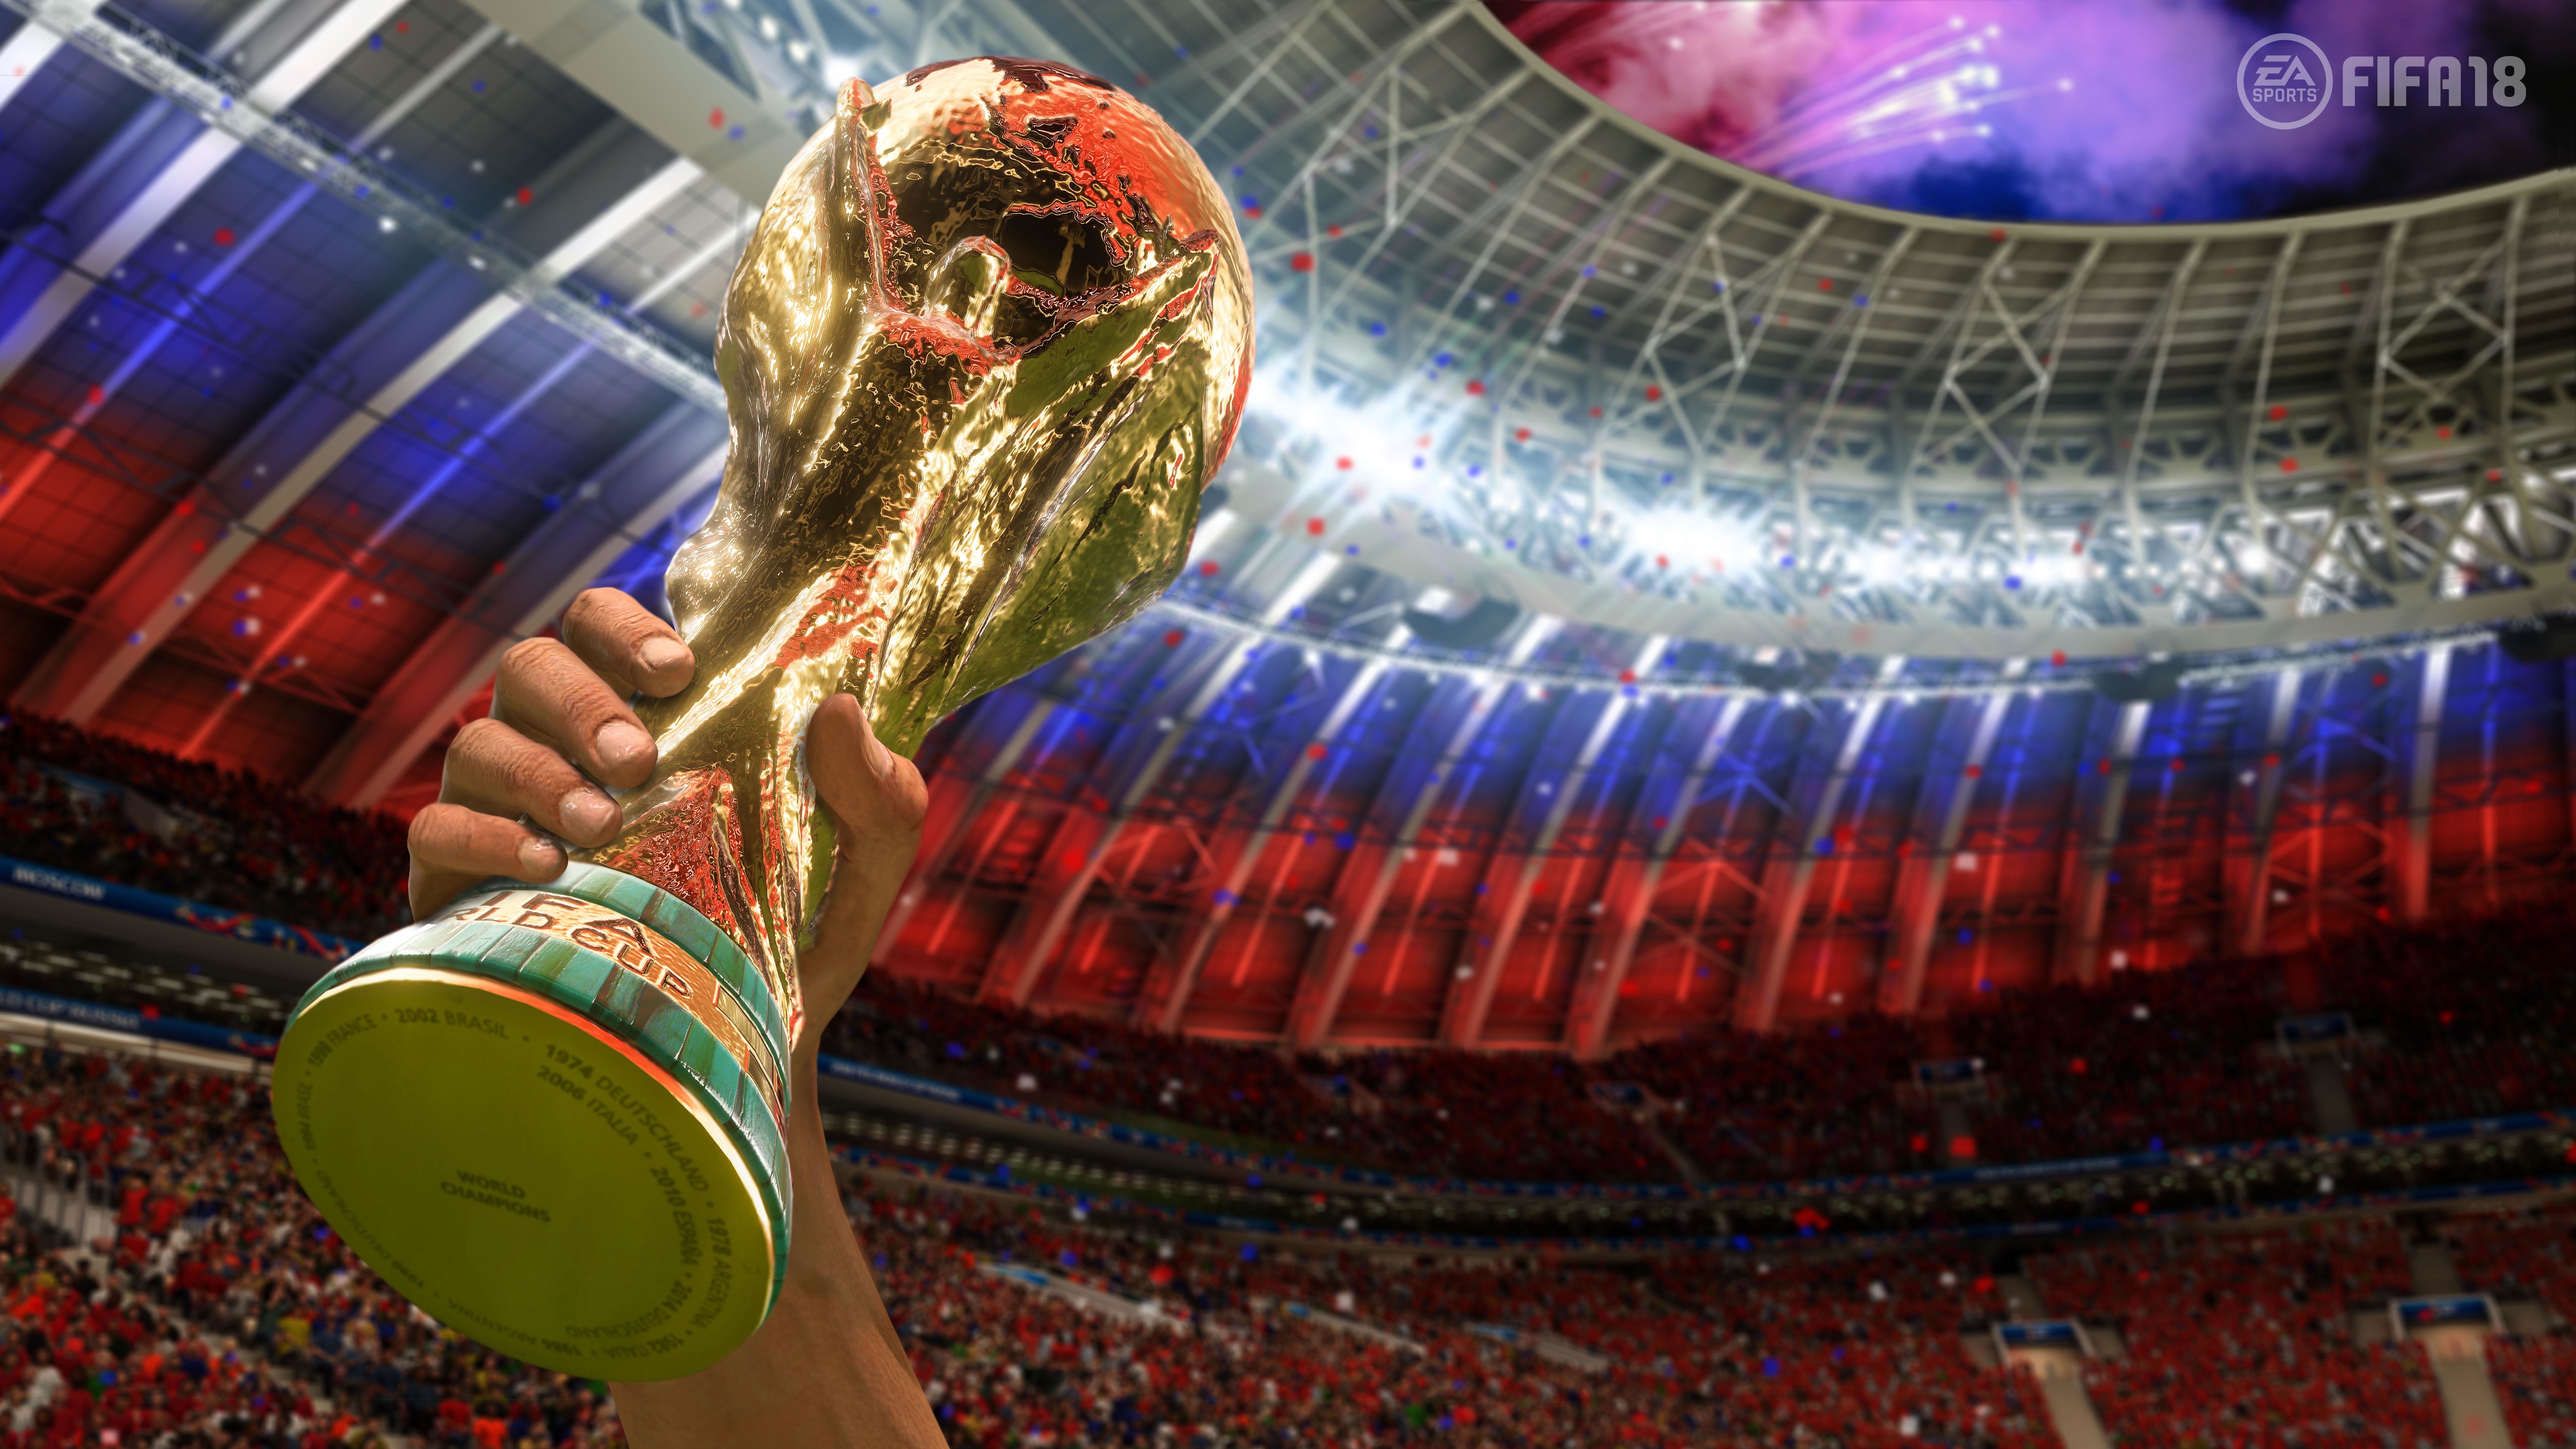 Fifa 18 Trophy, HD Games, 4k Wallpapers, Images ...